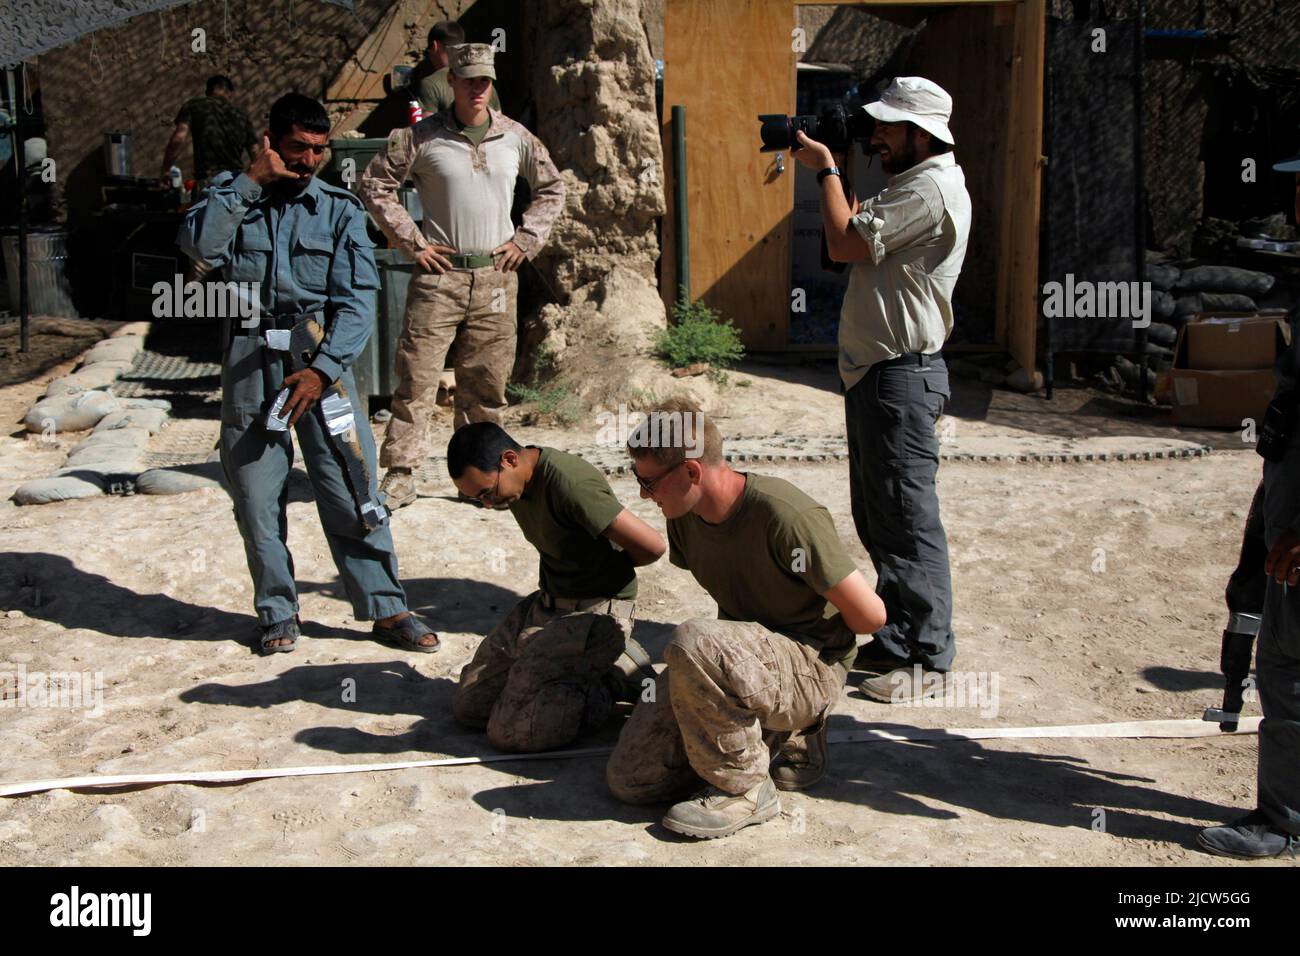 Ben Foley, right, cameraman, with Al Jazeera English News Channel films local Afghan Uniformed Police training as U.S. Marines with Police Advisory Te Stock Photo